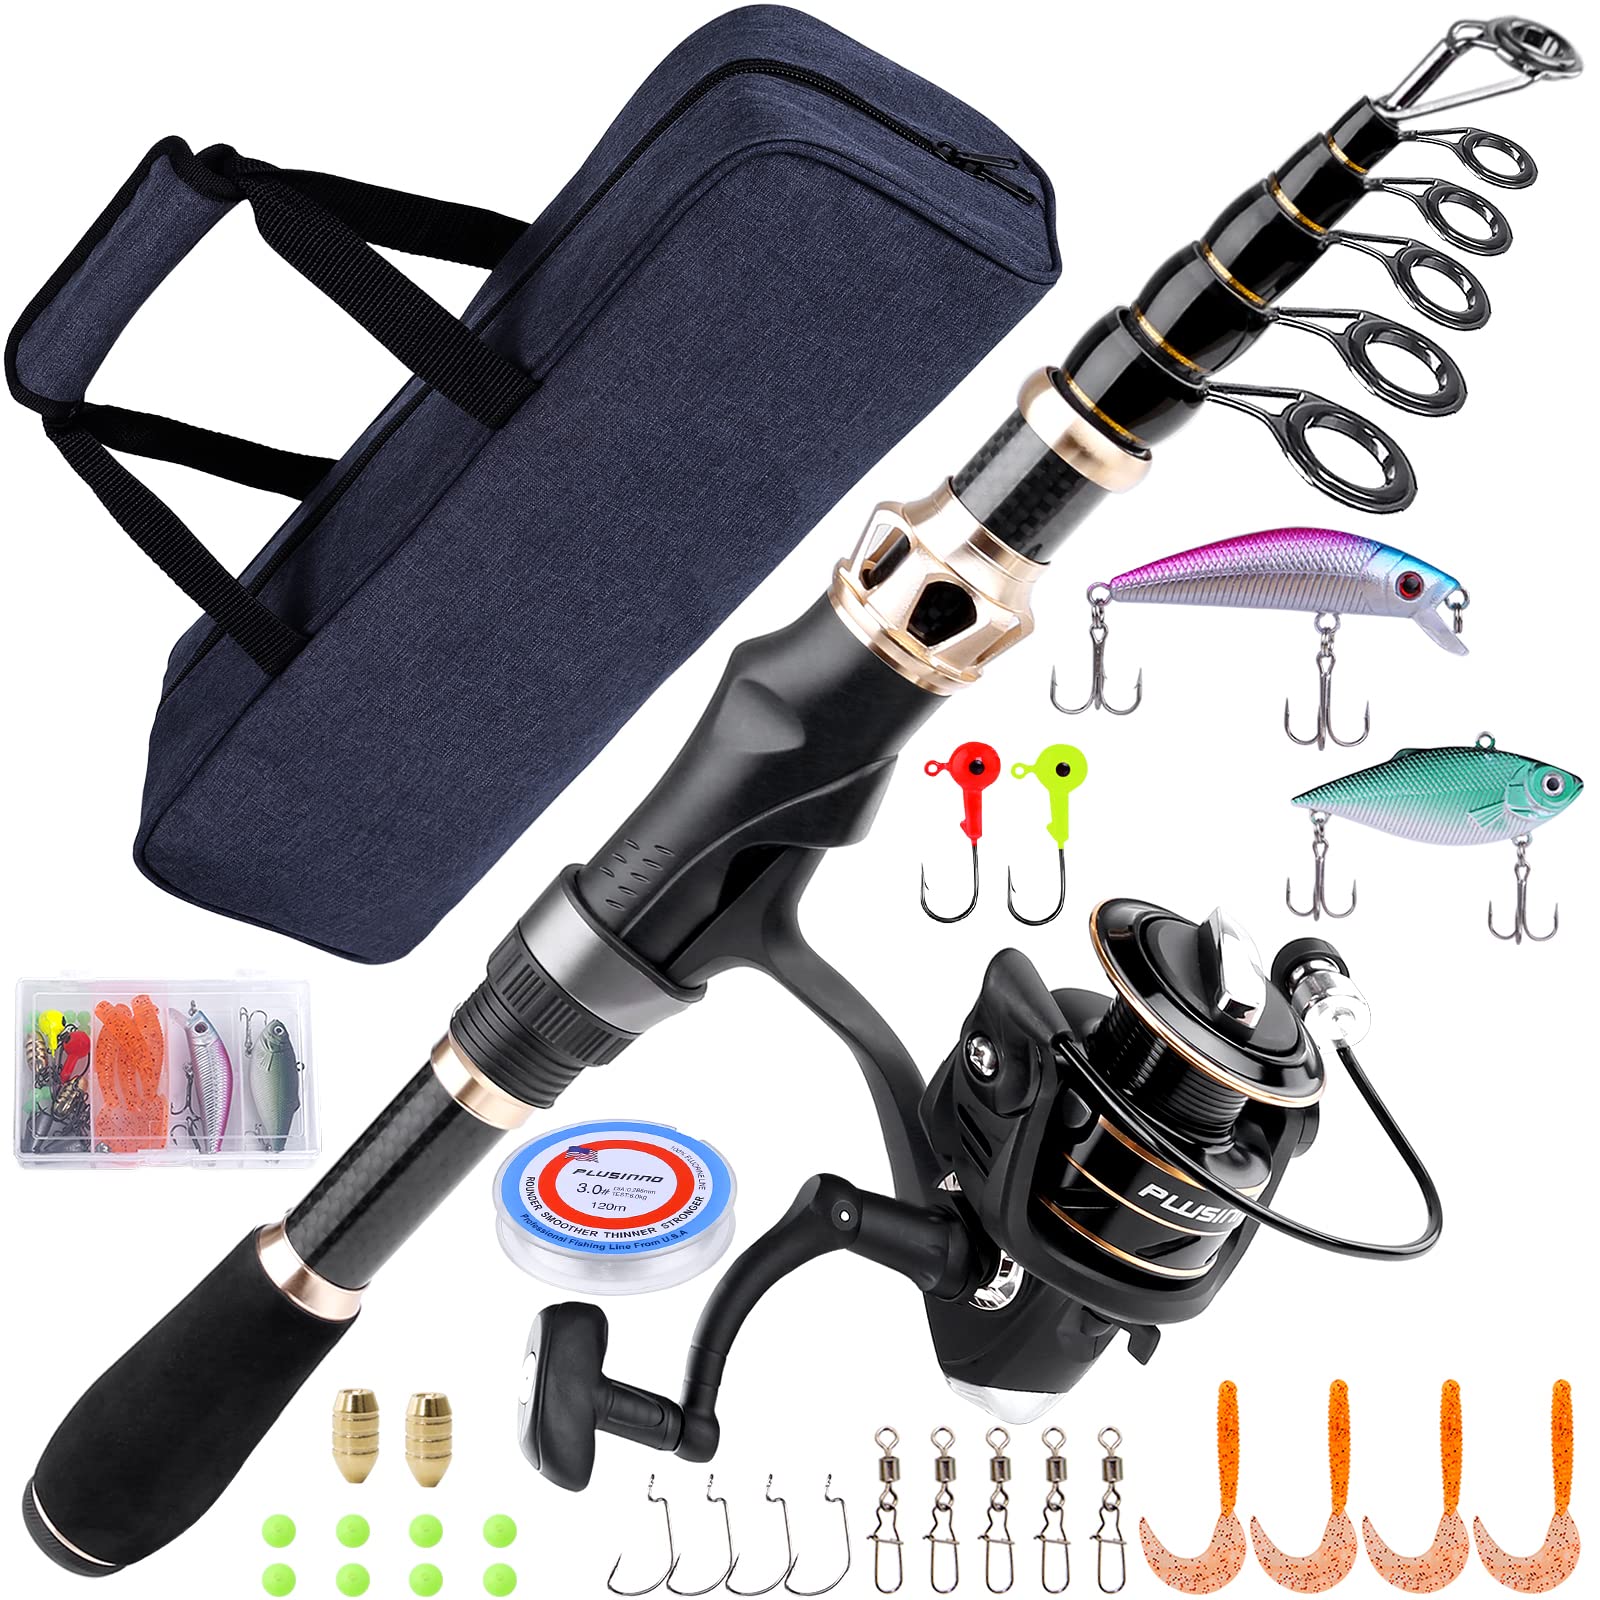 1.8-3.6m carbon telescopic fishing rod, combo spinning reel fishing set,  Short travel stick, full kit - Products Reviews and Ratings 